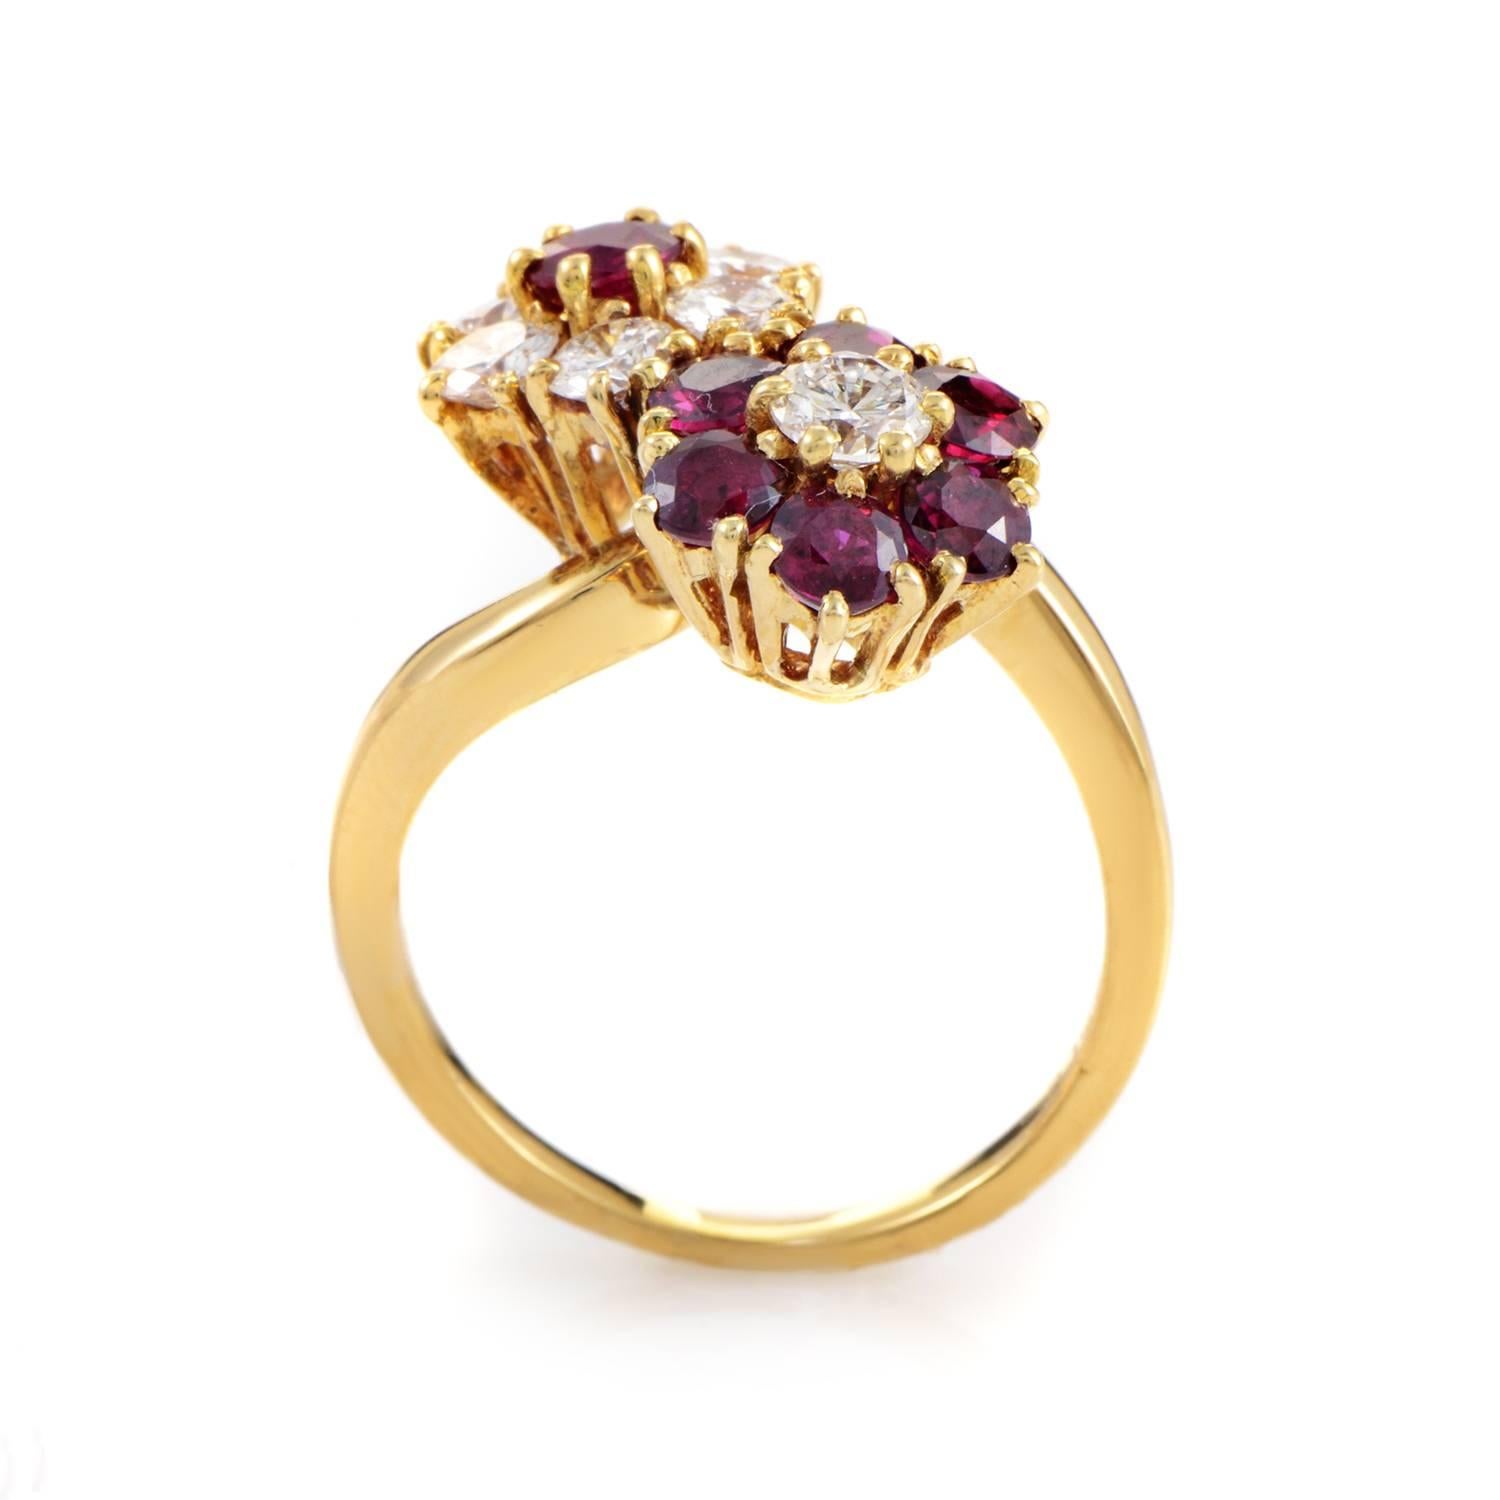 Creating a spellbinding sight to behold, the lovely rubies totaling approximately 1.00 carat and sparkling diamonds amounting approximately to also 1.00 carat sit on top of a beautiful 18K yellow gold body in this exceptional ring from Van Cleef